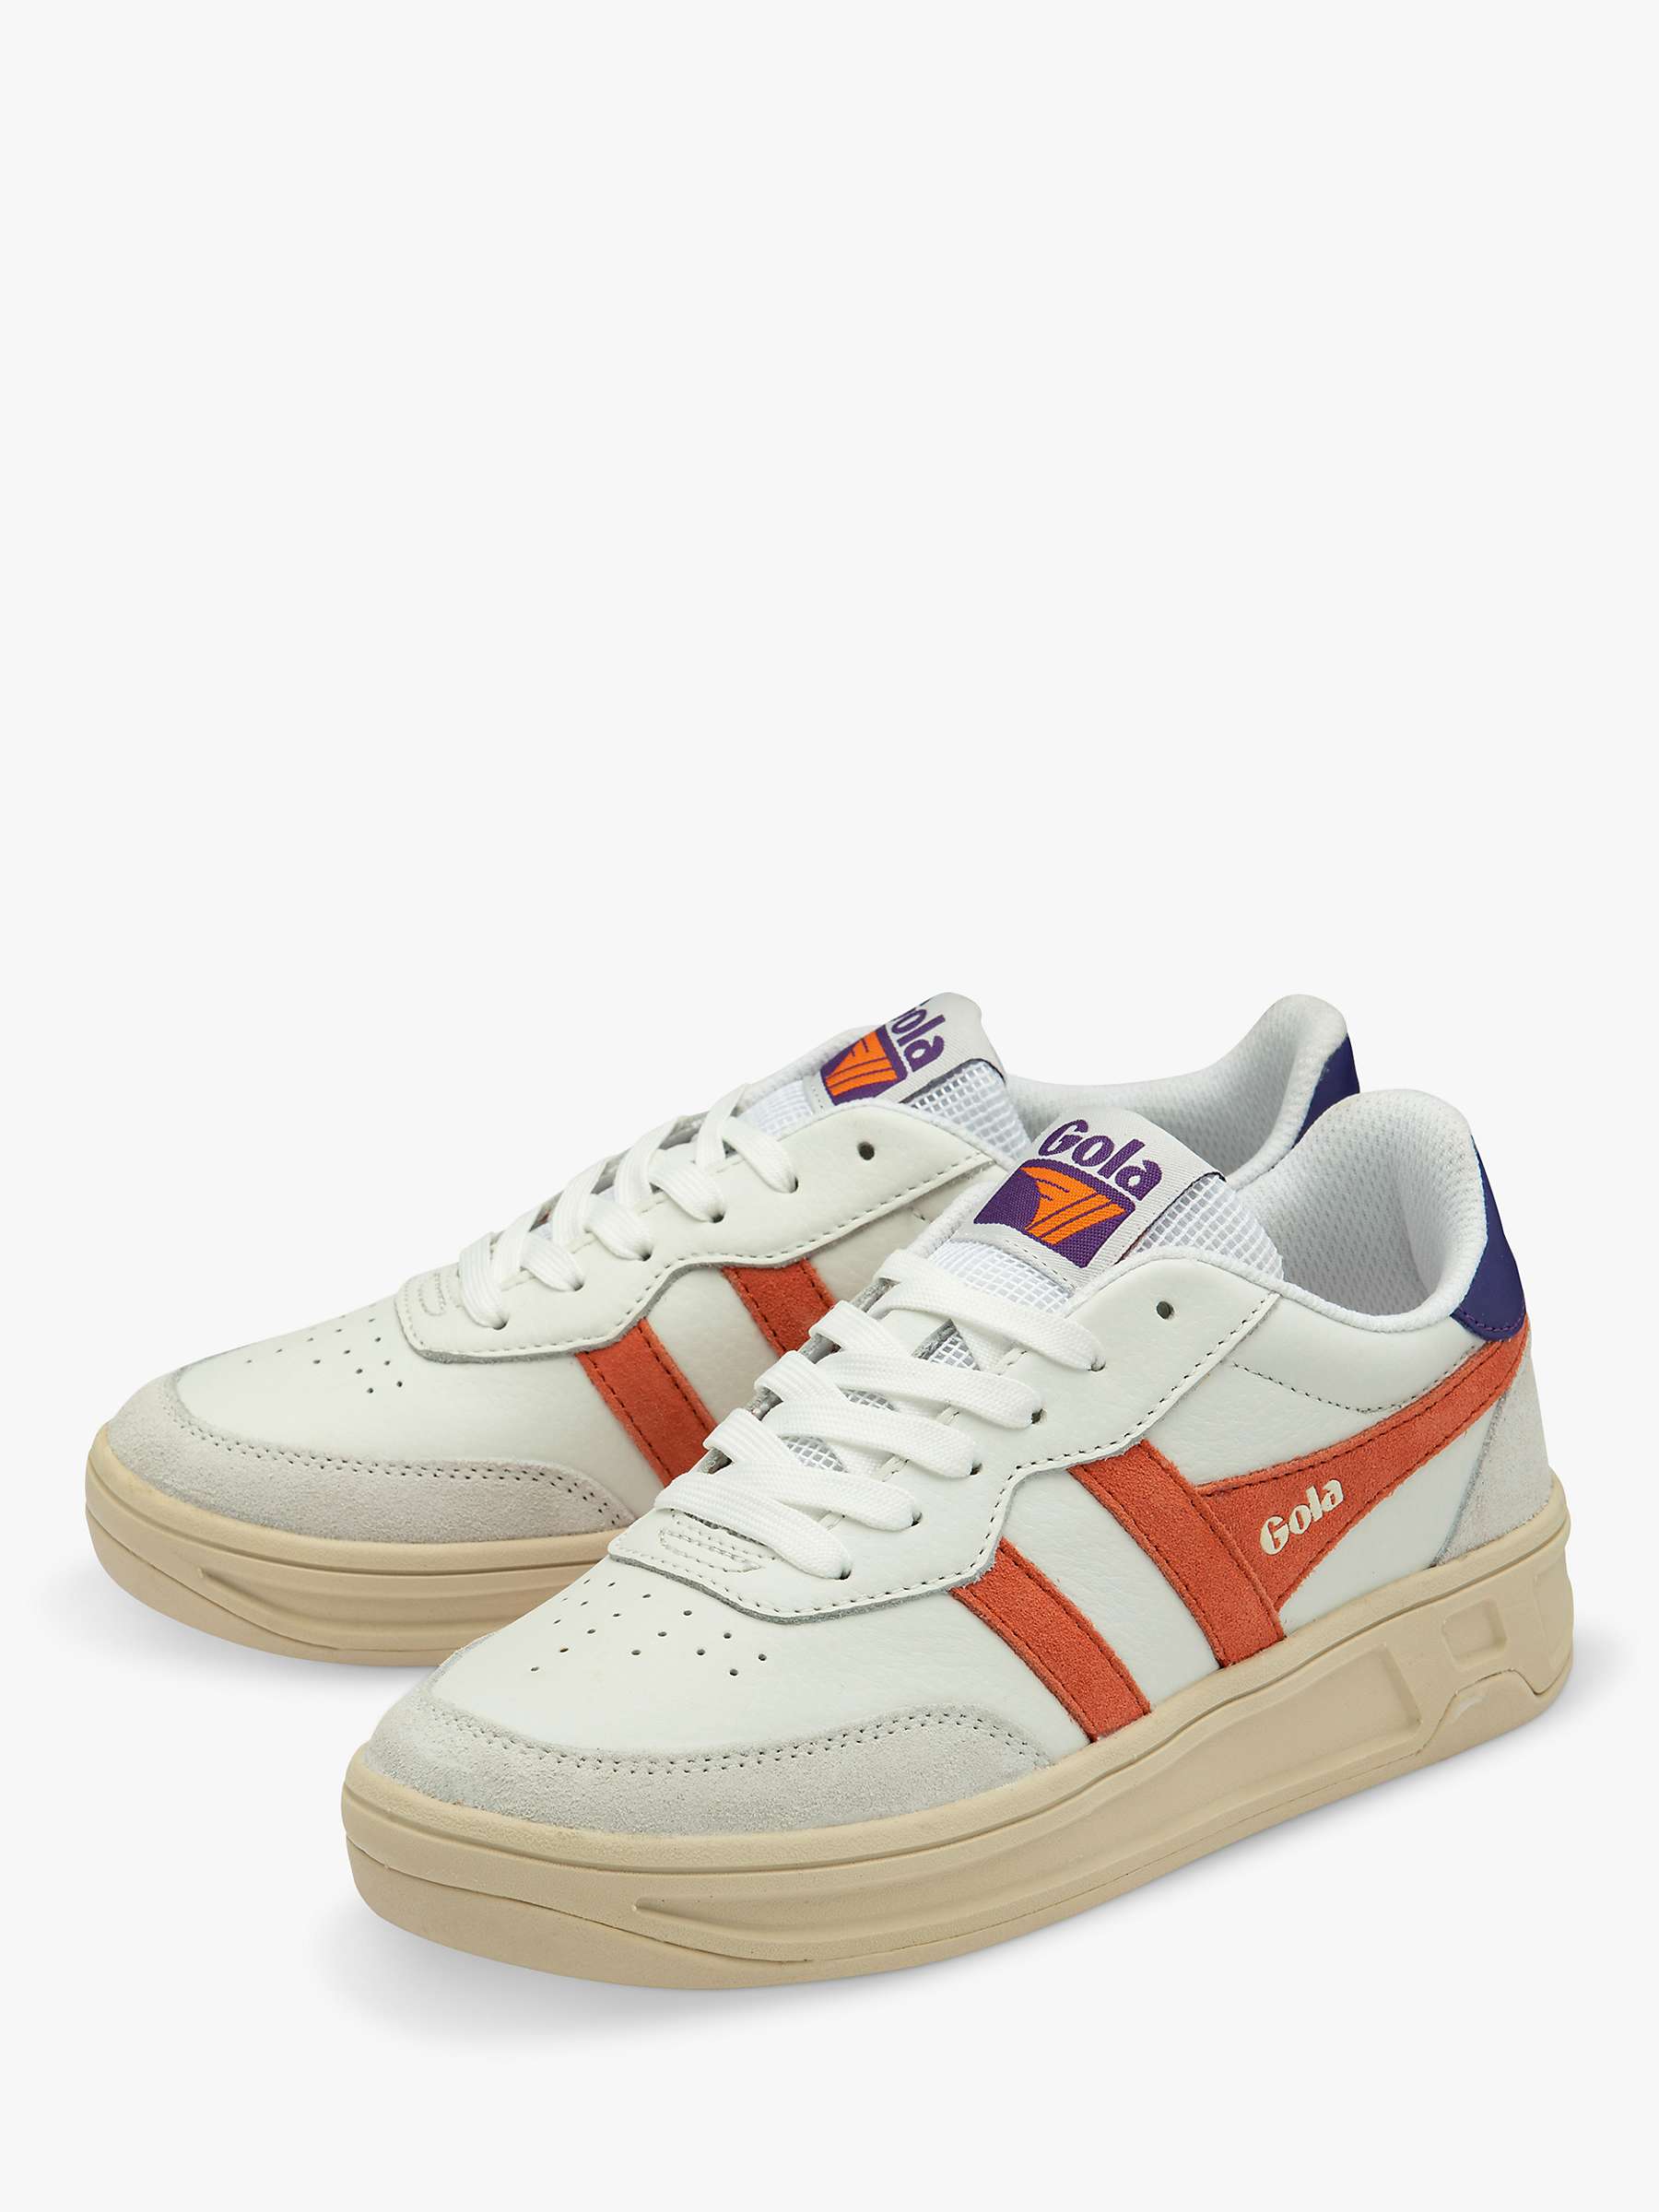 Buy Gola Classics Topspin Leather Lace Up Trainers Online at johnlewis.com